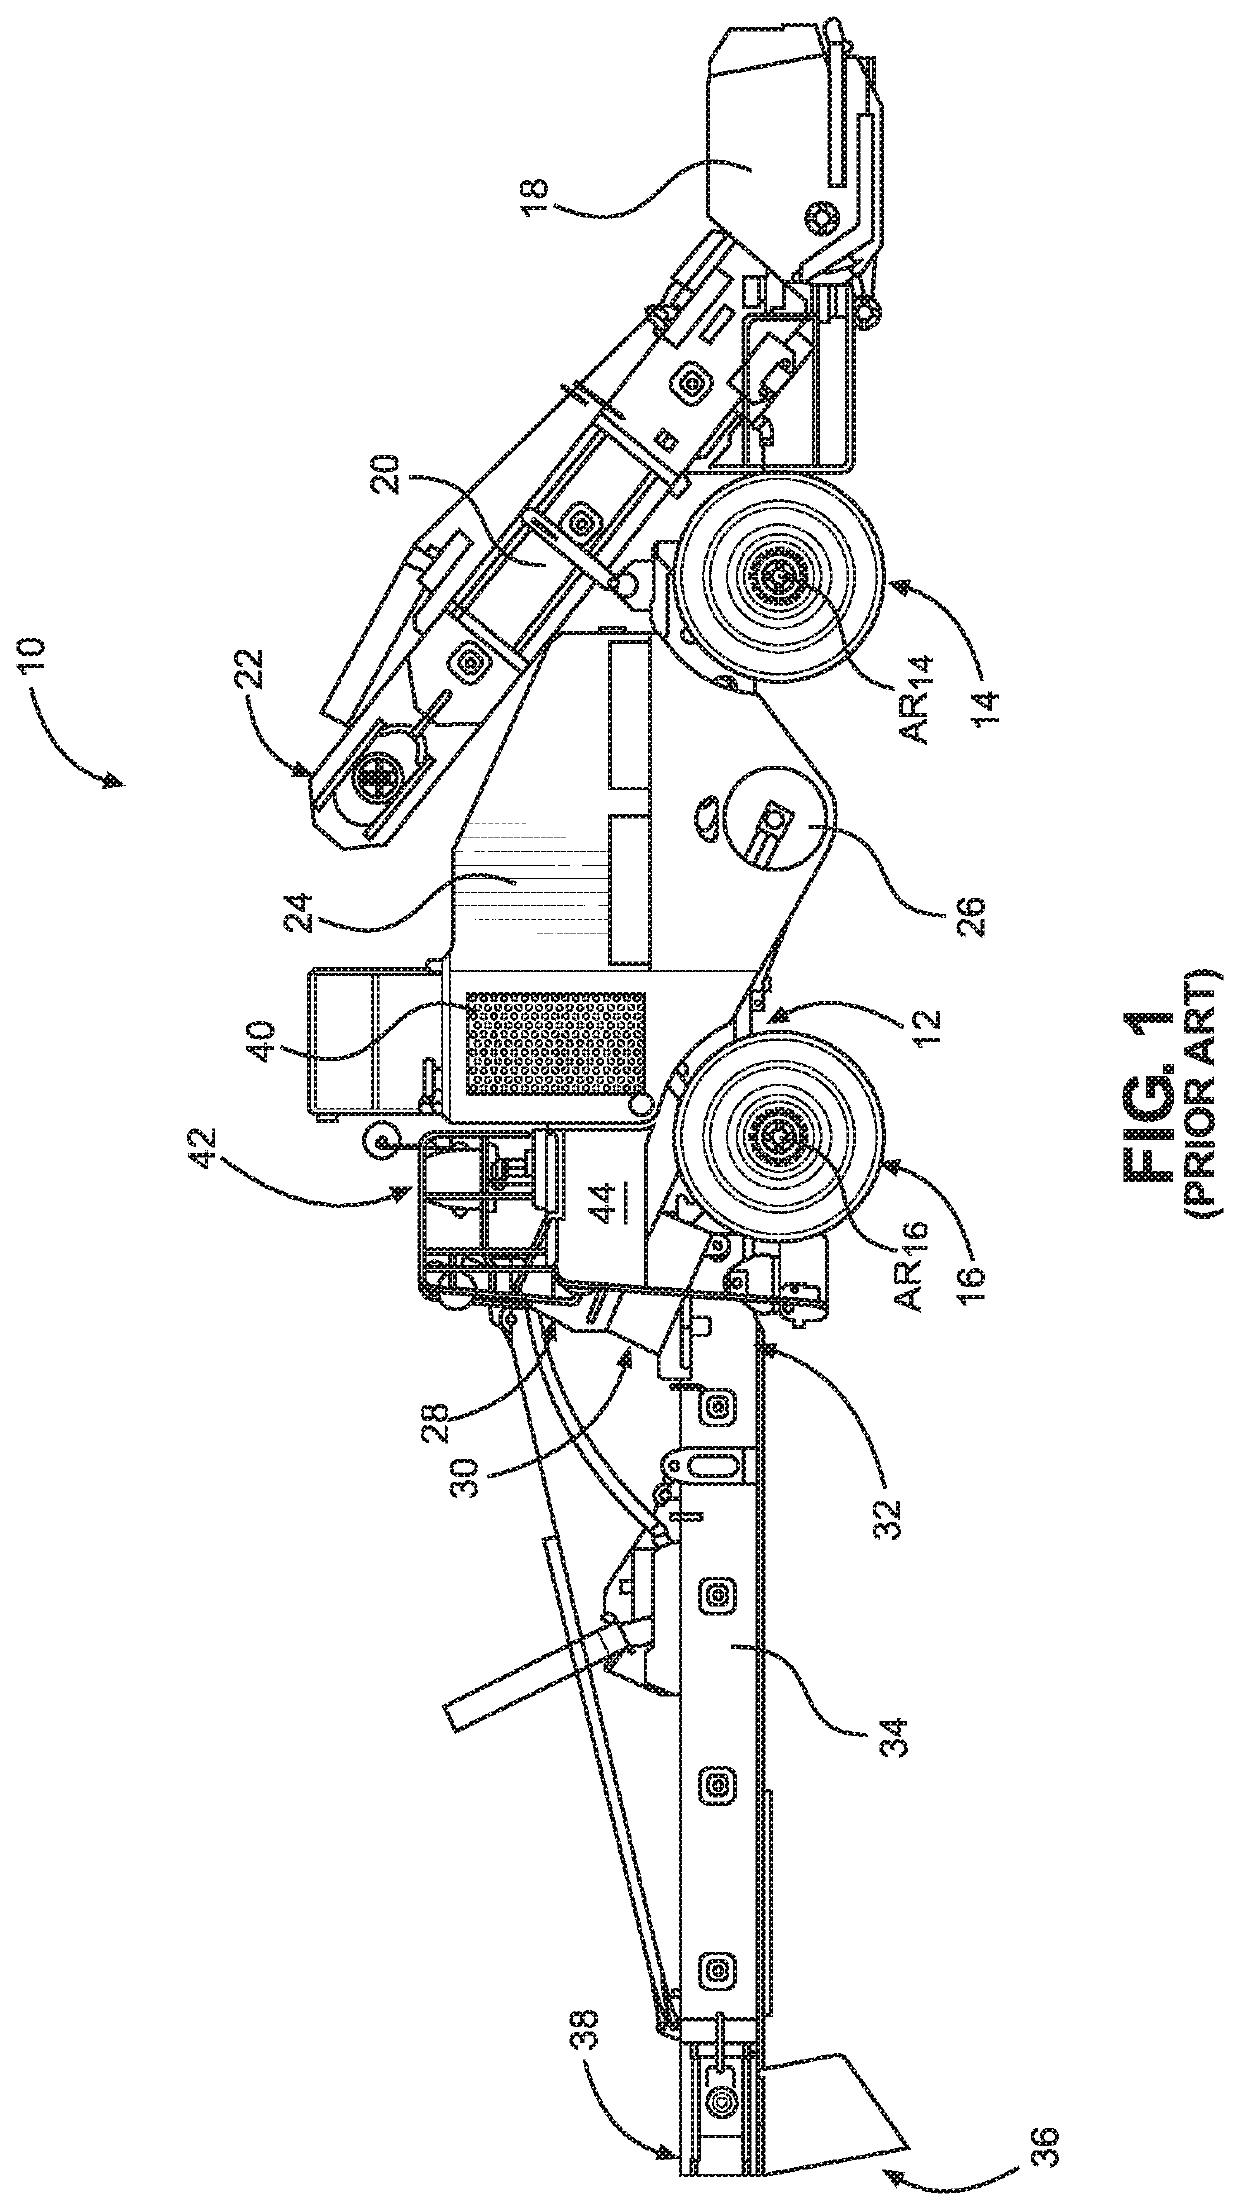 Material transfer vehicle with modular engine assembly